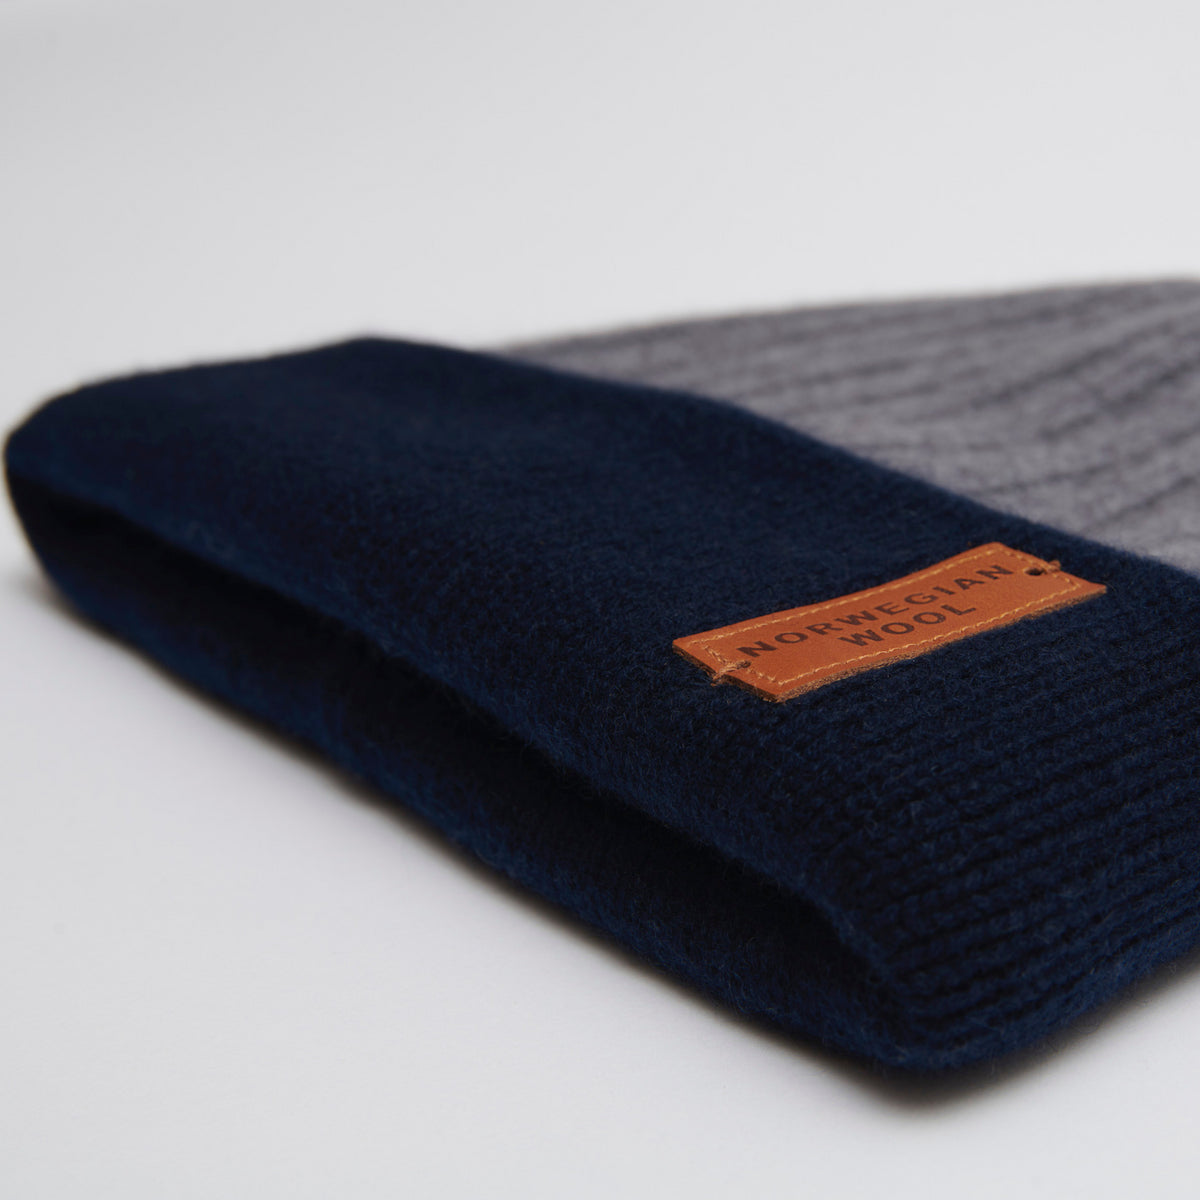 Double Layered Cashmere Beanies with Leather Detail